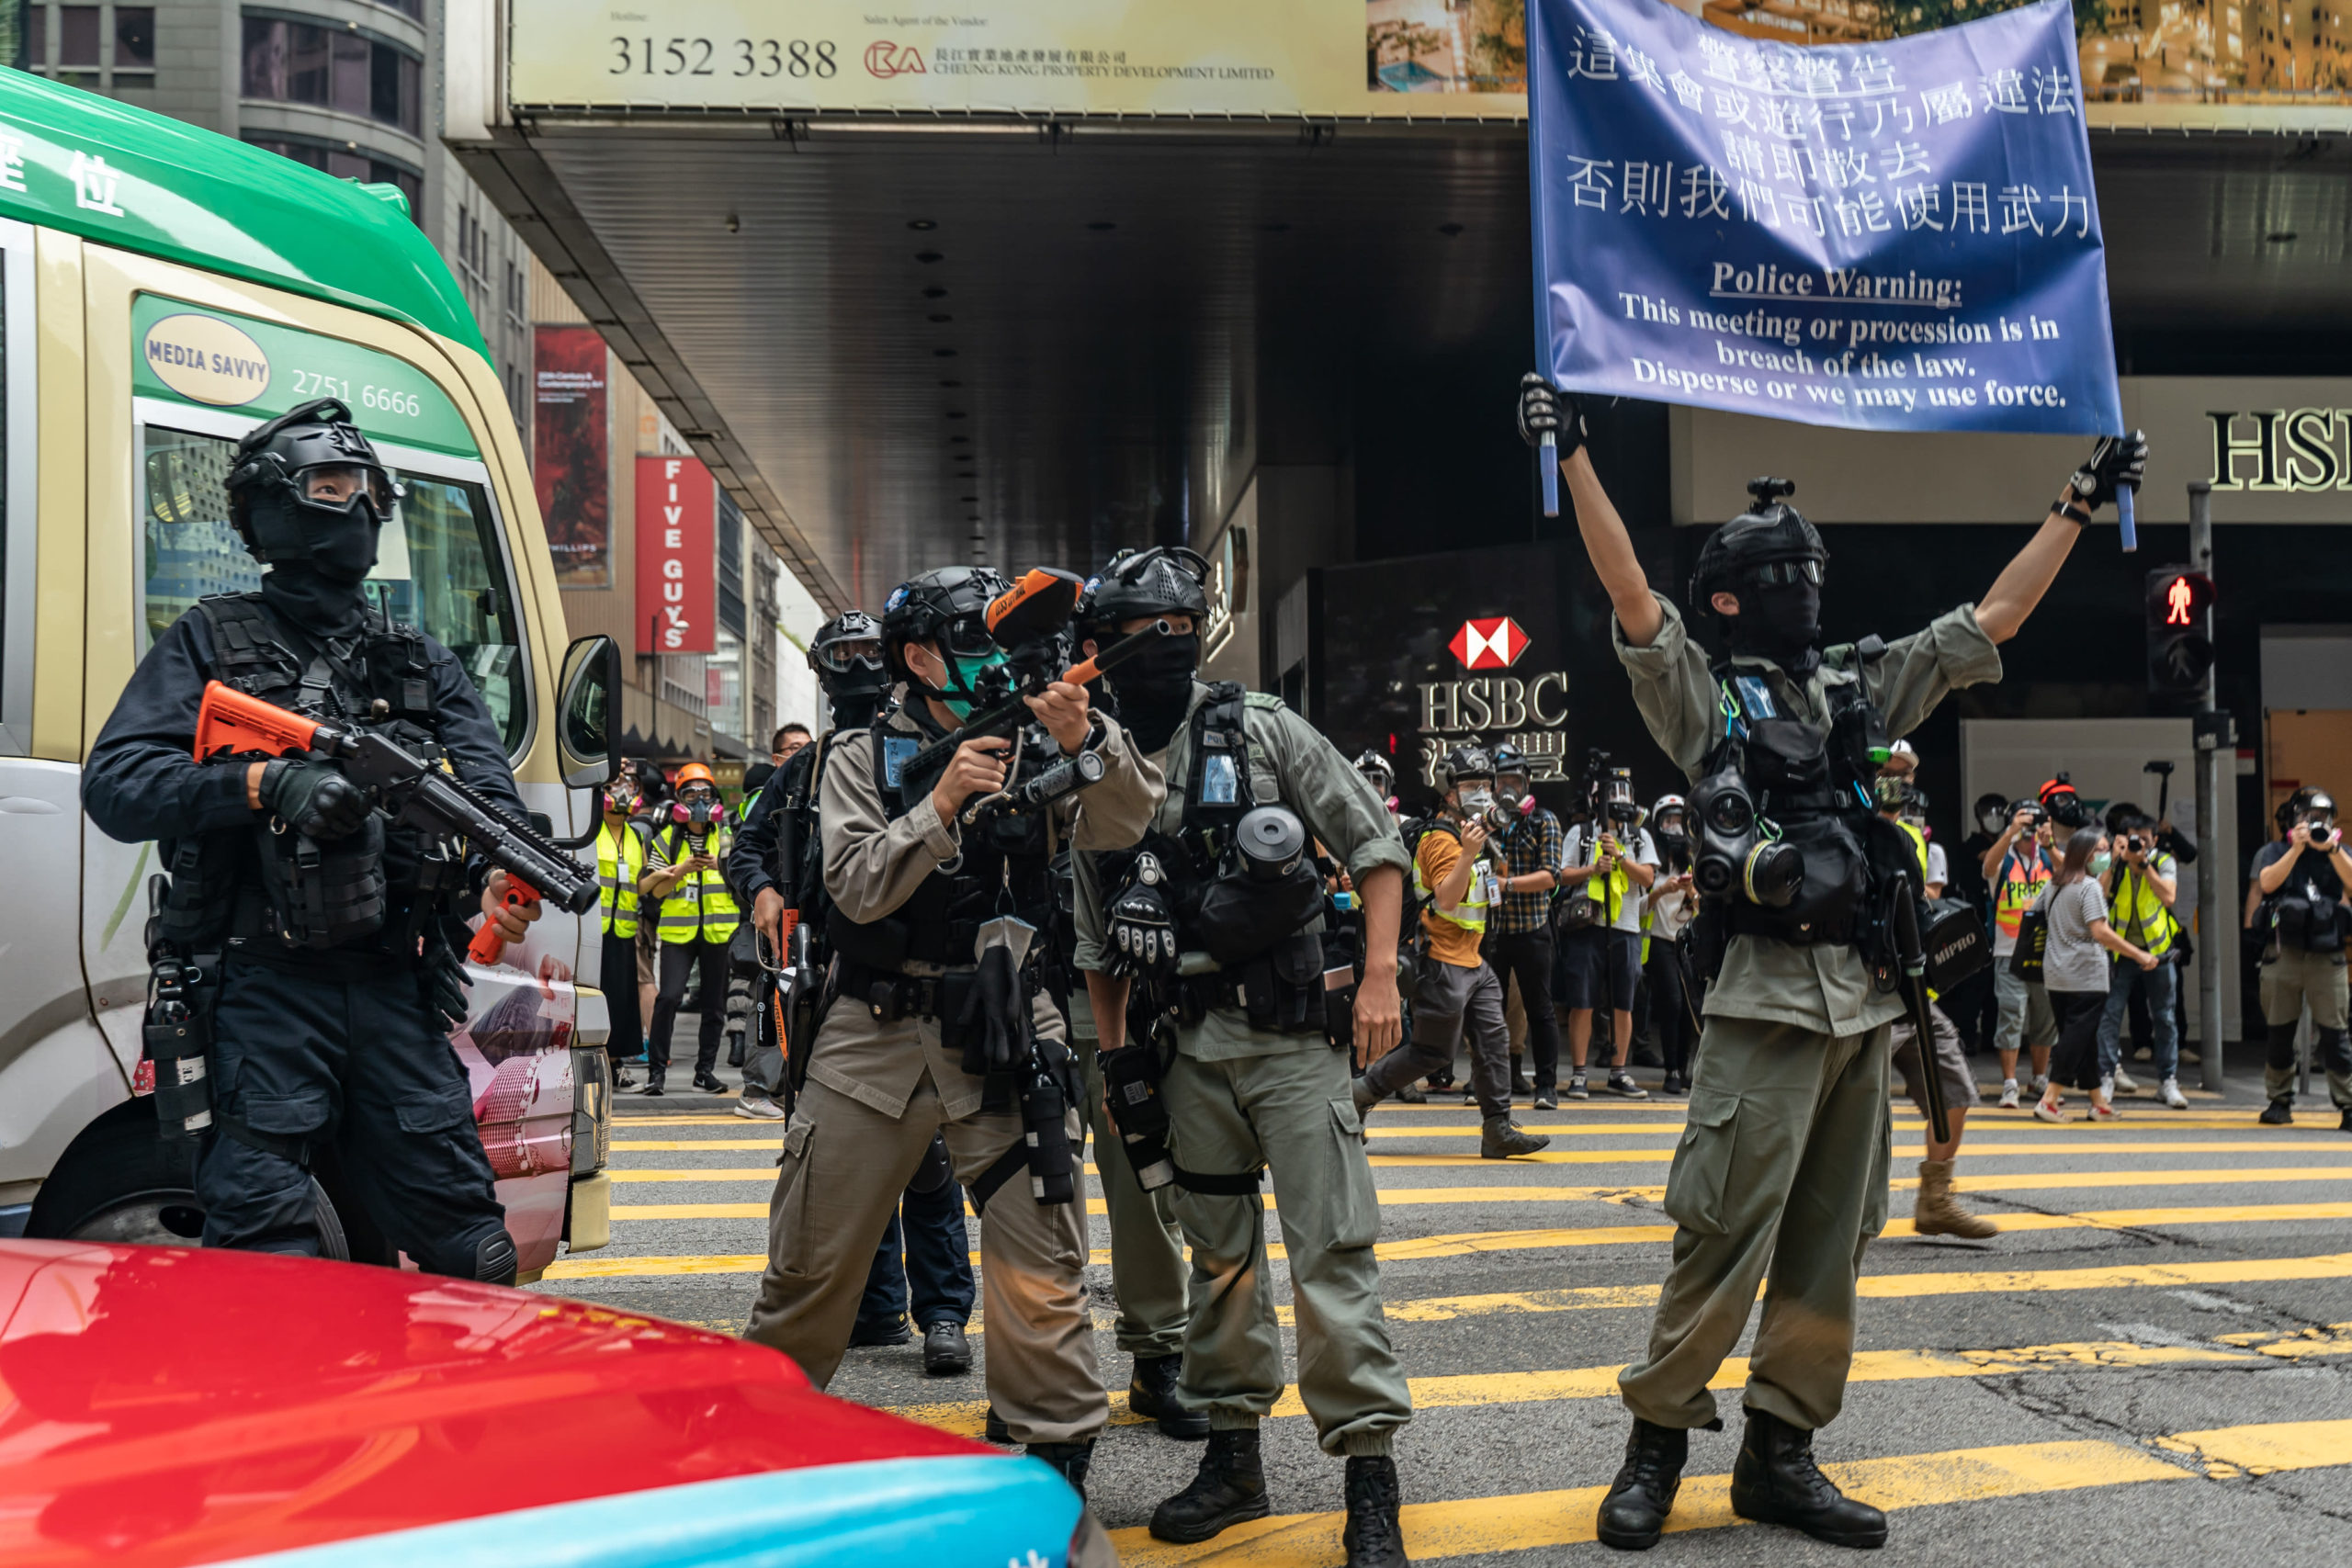 The Five Eyes has been in the vanguard of Hong Kong protests